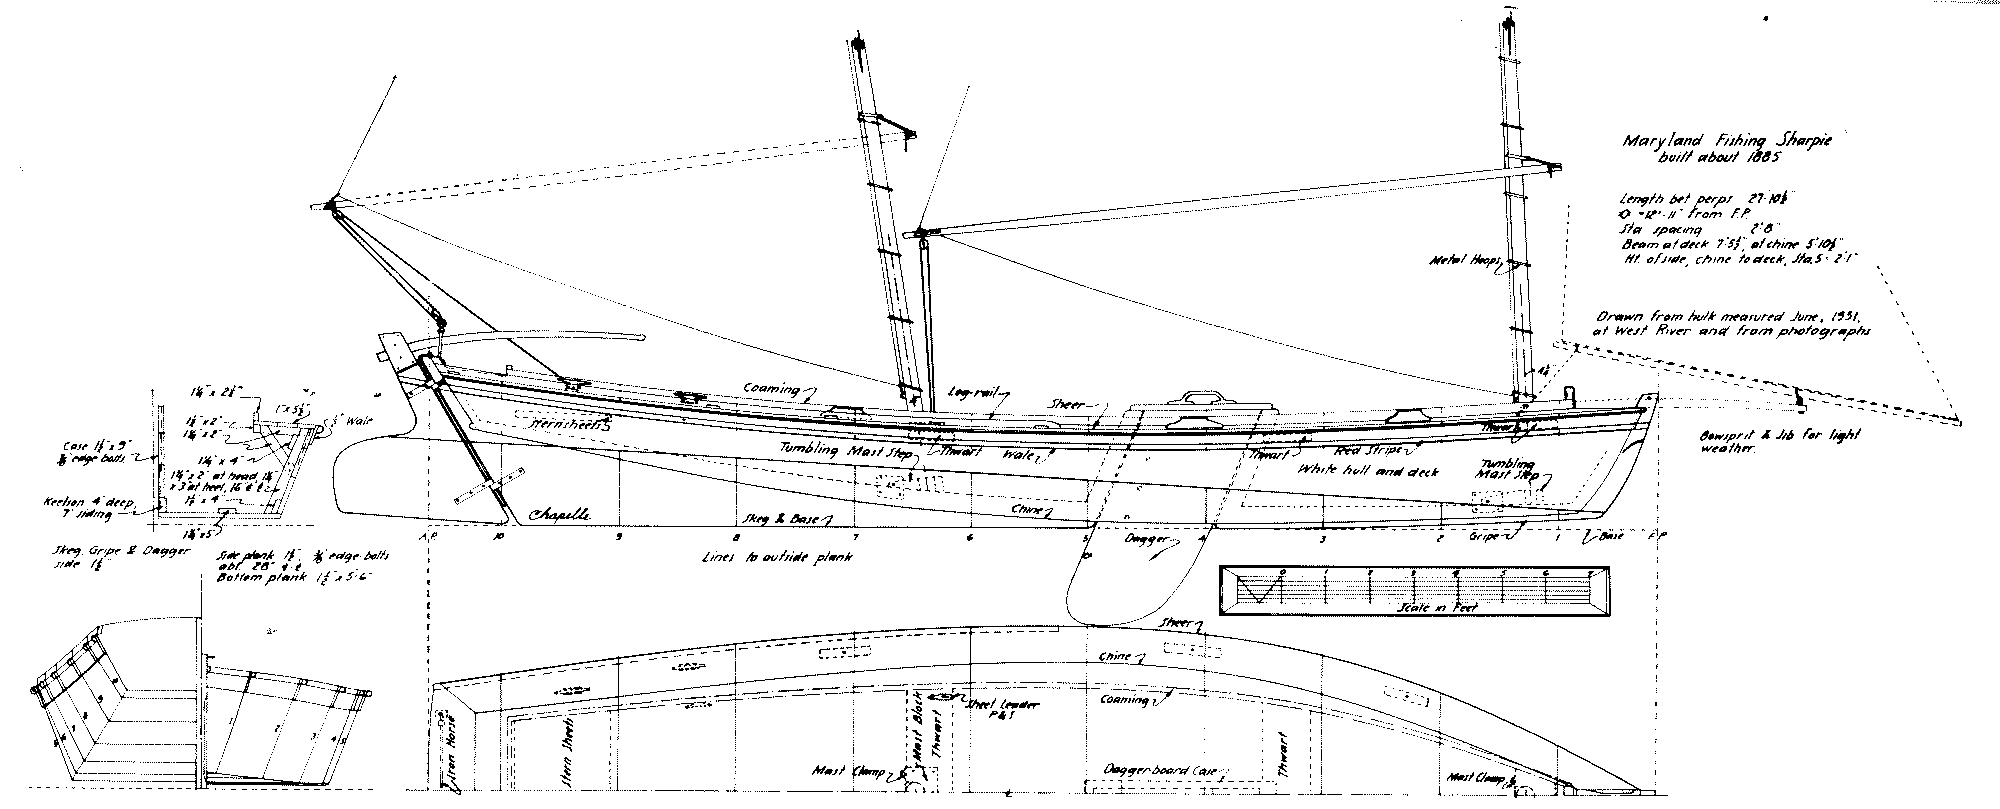  Plan of a large Chesapeake Bay sharpie takenfrom remains of boat